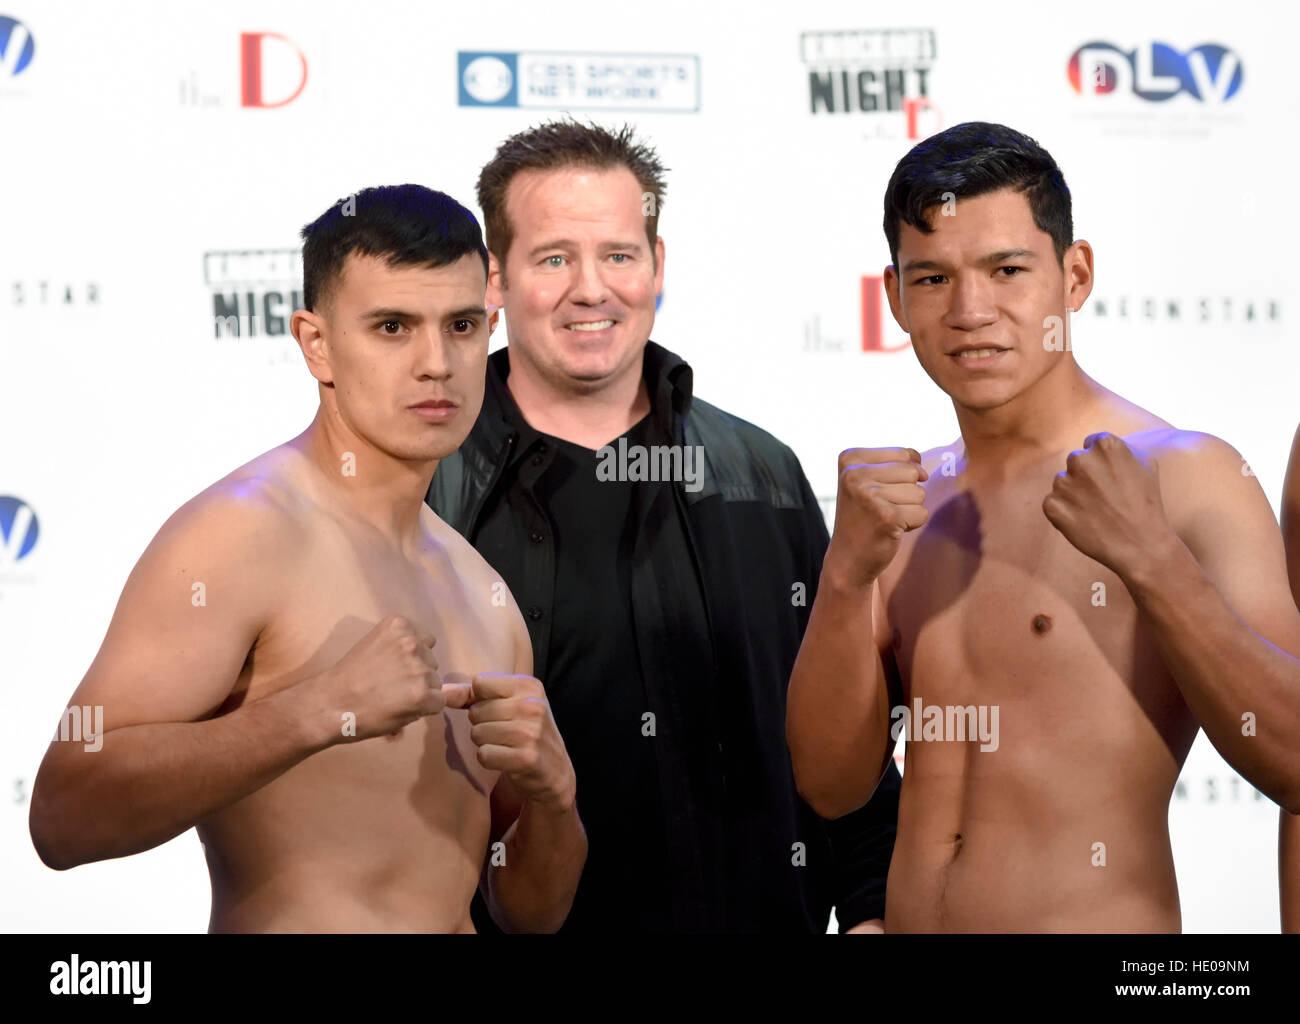 Las Vegas, Nevada December 16, 2016 -  Welterweight fighters Flavio Rodriguez and Dilan “El Terrible” Loza weigh-in for “Knockout Night at the D”  presented by the D Las Vegas and DLVEC and promoted by Roy Jones Jr. Boxing. Credit: Ken Howard/Alamy Live News Stock Photo